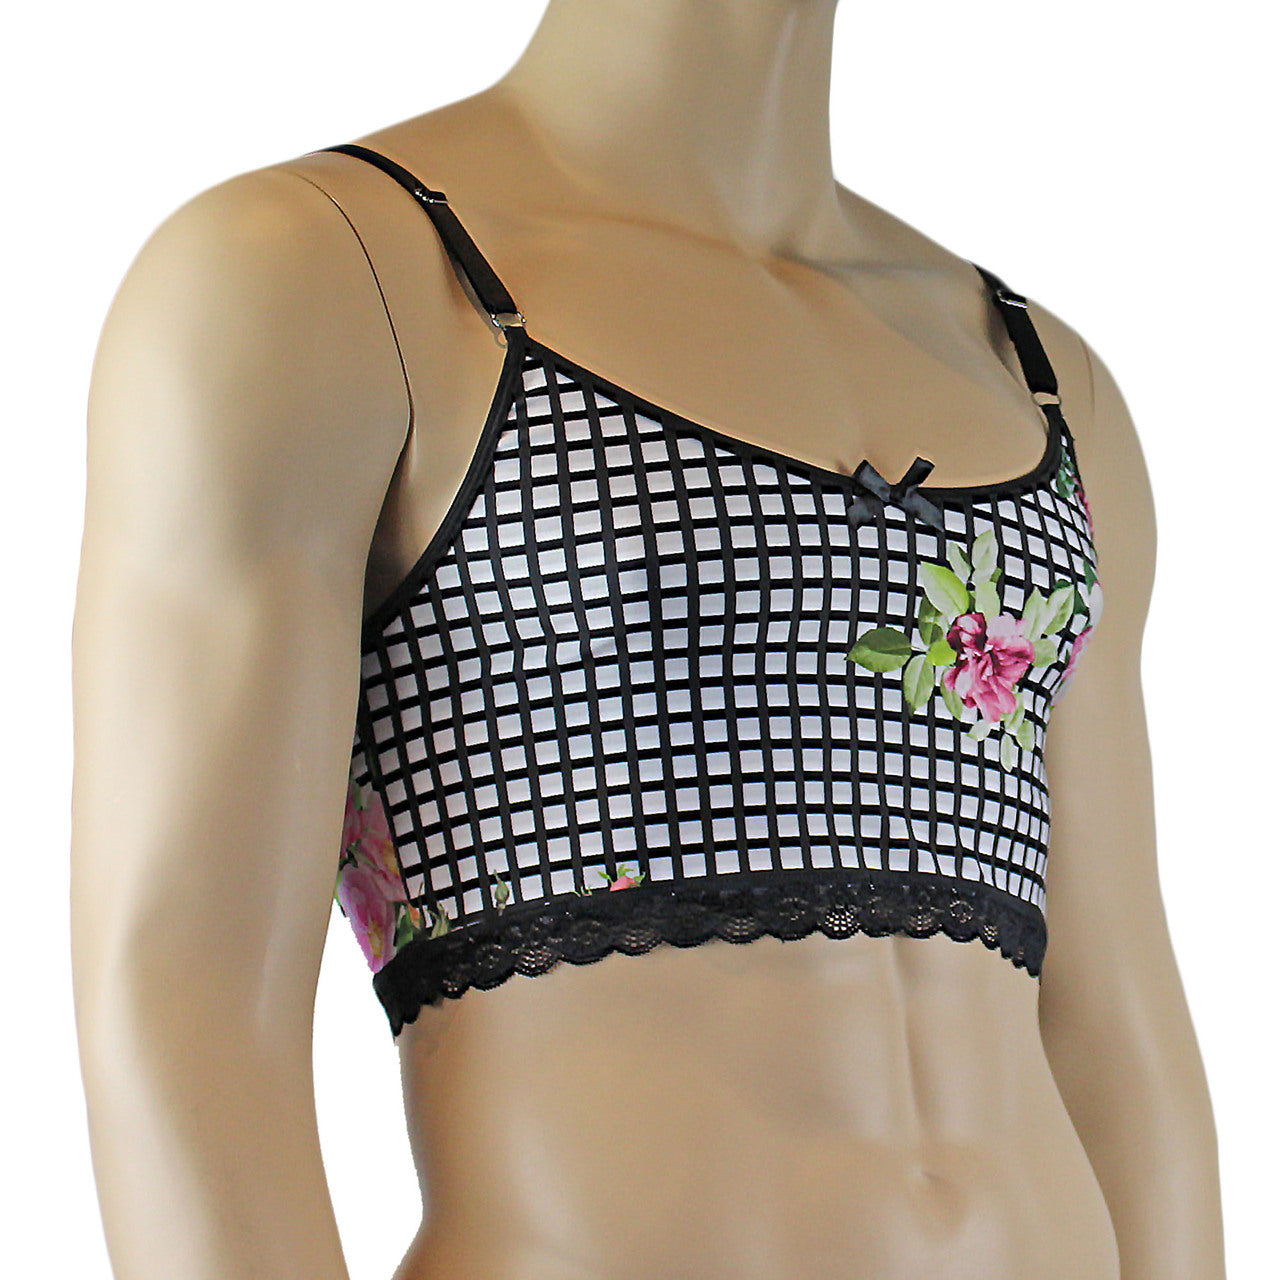 Mens Diana Camisole Top in a Pretty Flower Checkered Print Spandex